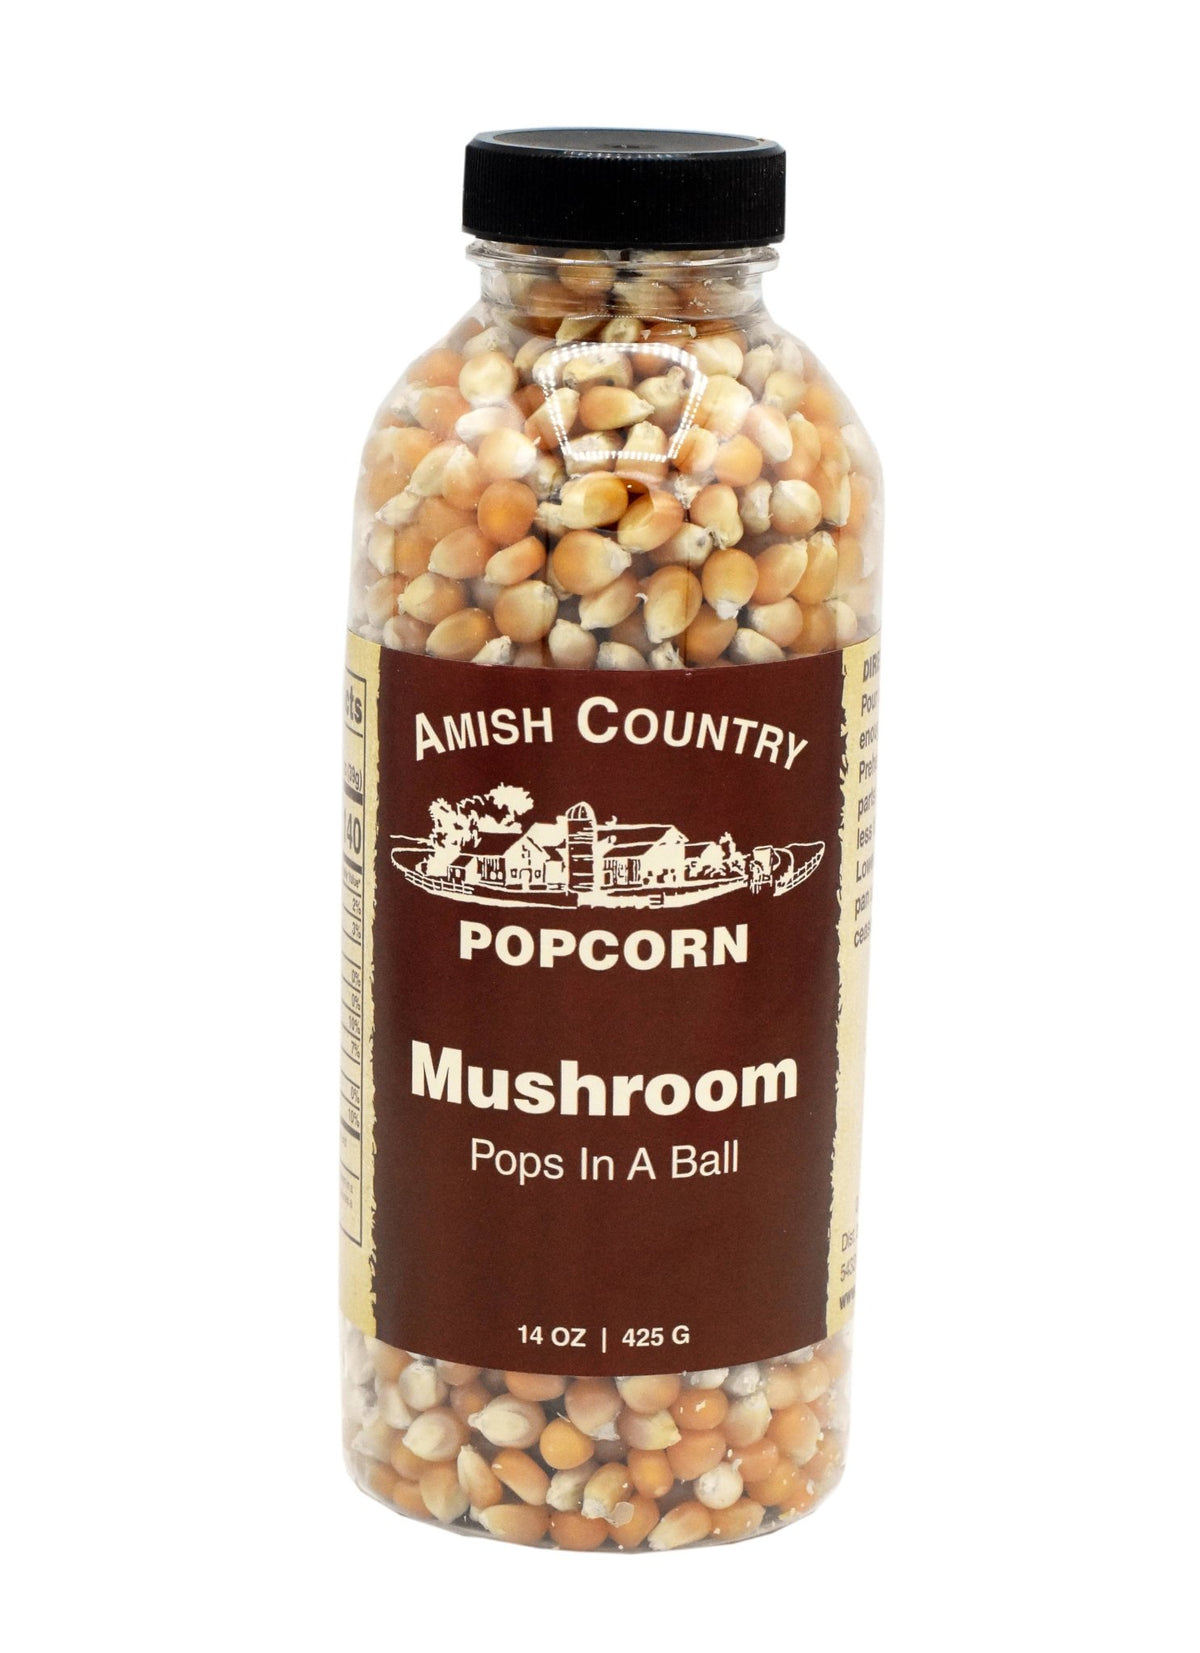 Amish Country Popcorn - 14oz Bottle of Mushroom Popcorn - Pacific Flyway Supplies